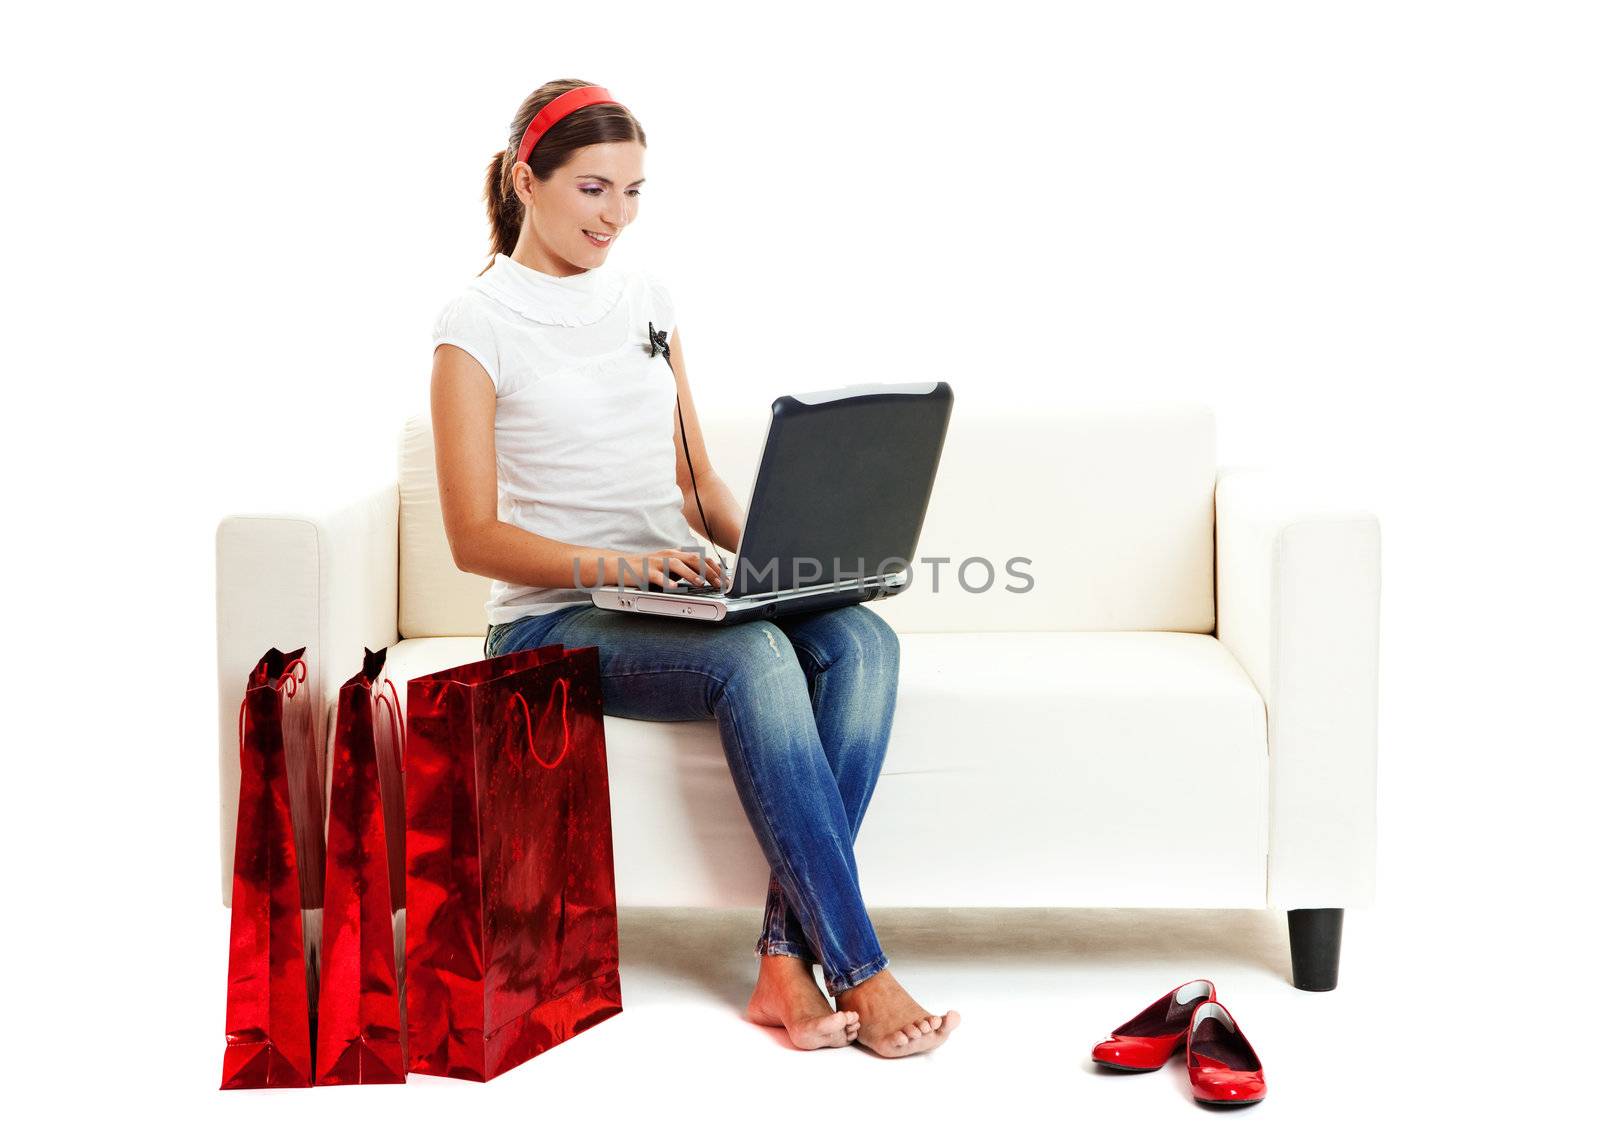 Beautiful young woman at home doing online shop, Consumerism concept
